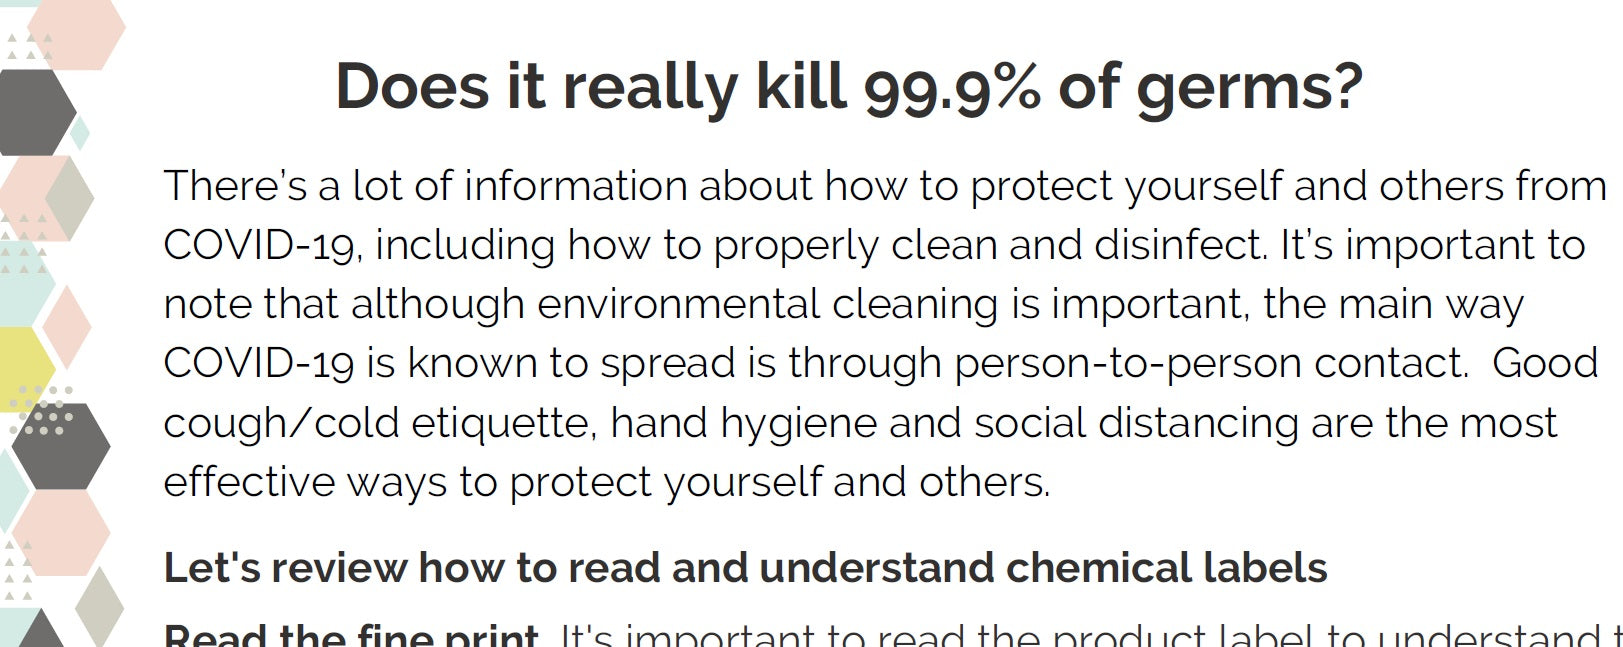 Sample page - Does it really kill 99.9% of germs?  There's a lot of information about how to protect yourself and others from covid-19, including how to properly clean and disinfect. It's important to note that although environmental cleaning is important, the main way COVID-19 is known to spread is through person to person contact. Good cough/cold etiquette, hand hygiene and social distancing are the most effective ways to protect yourself and others.